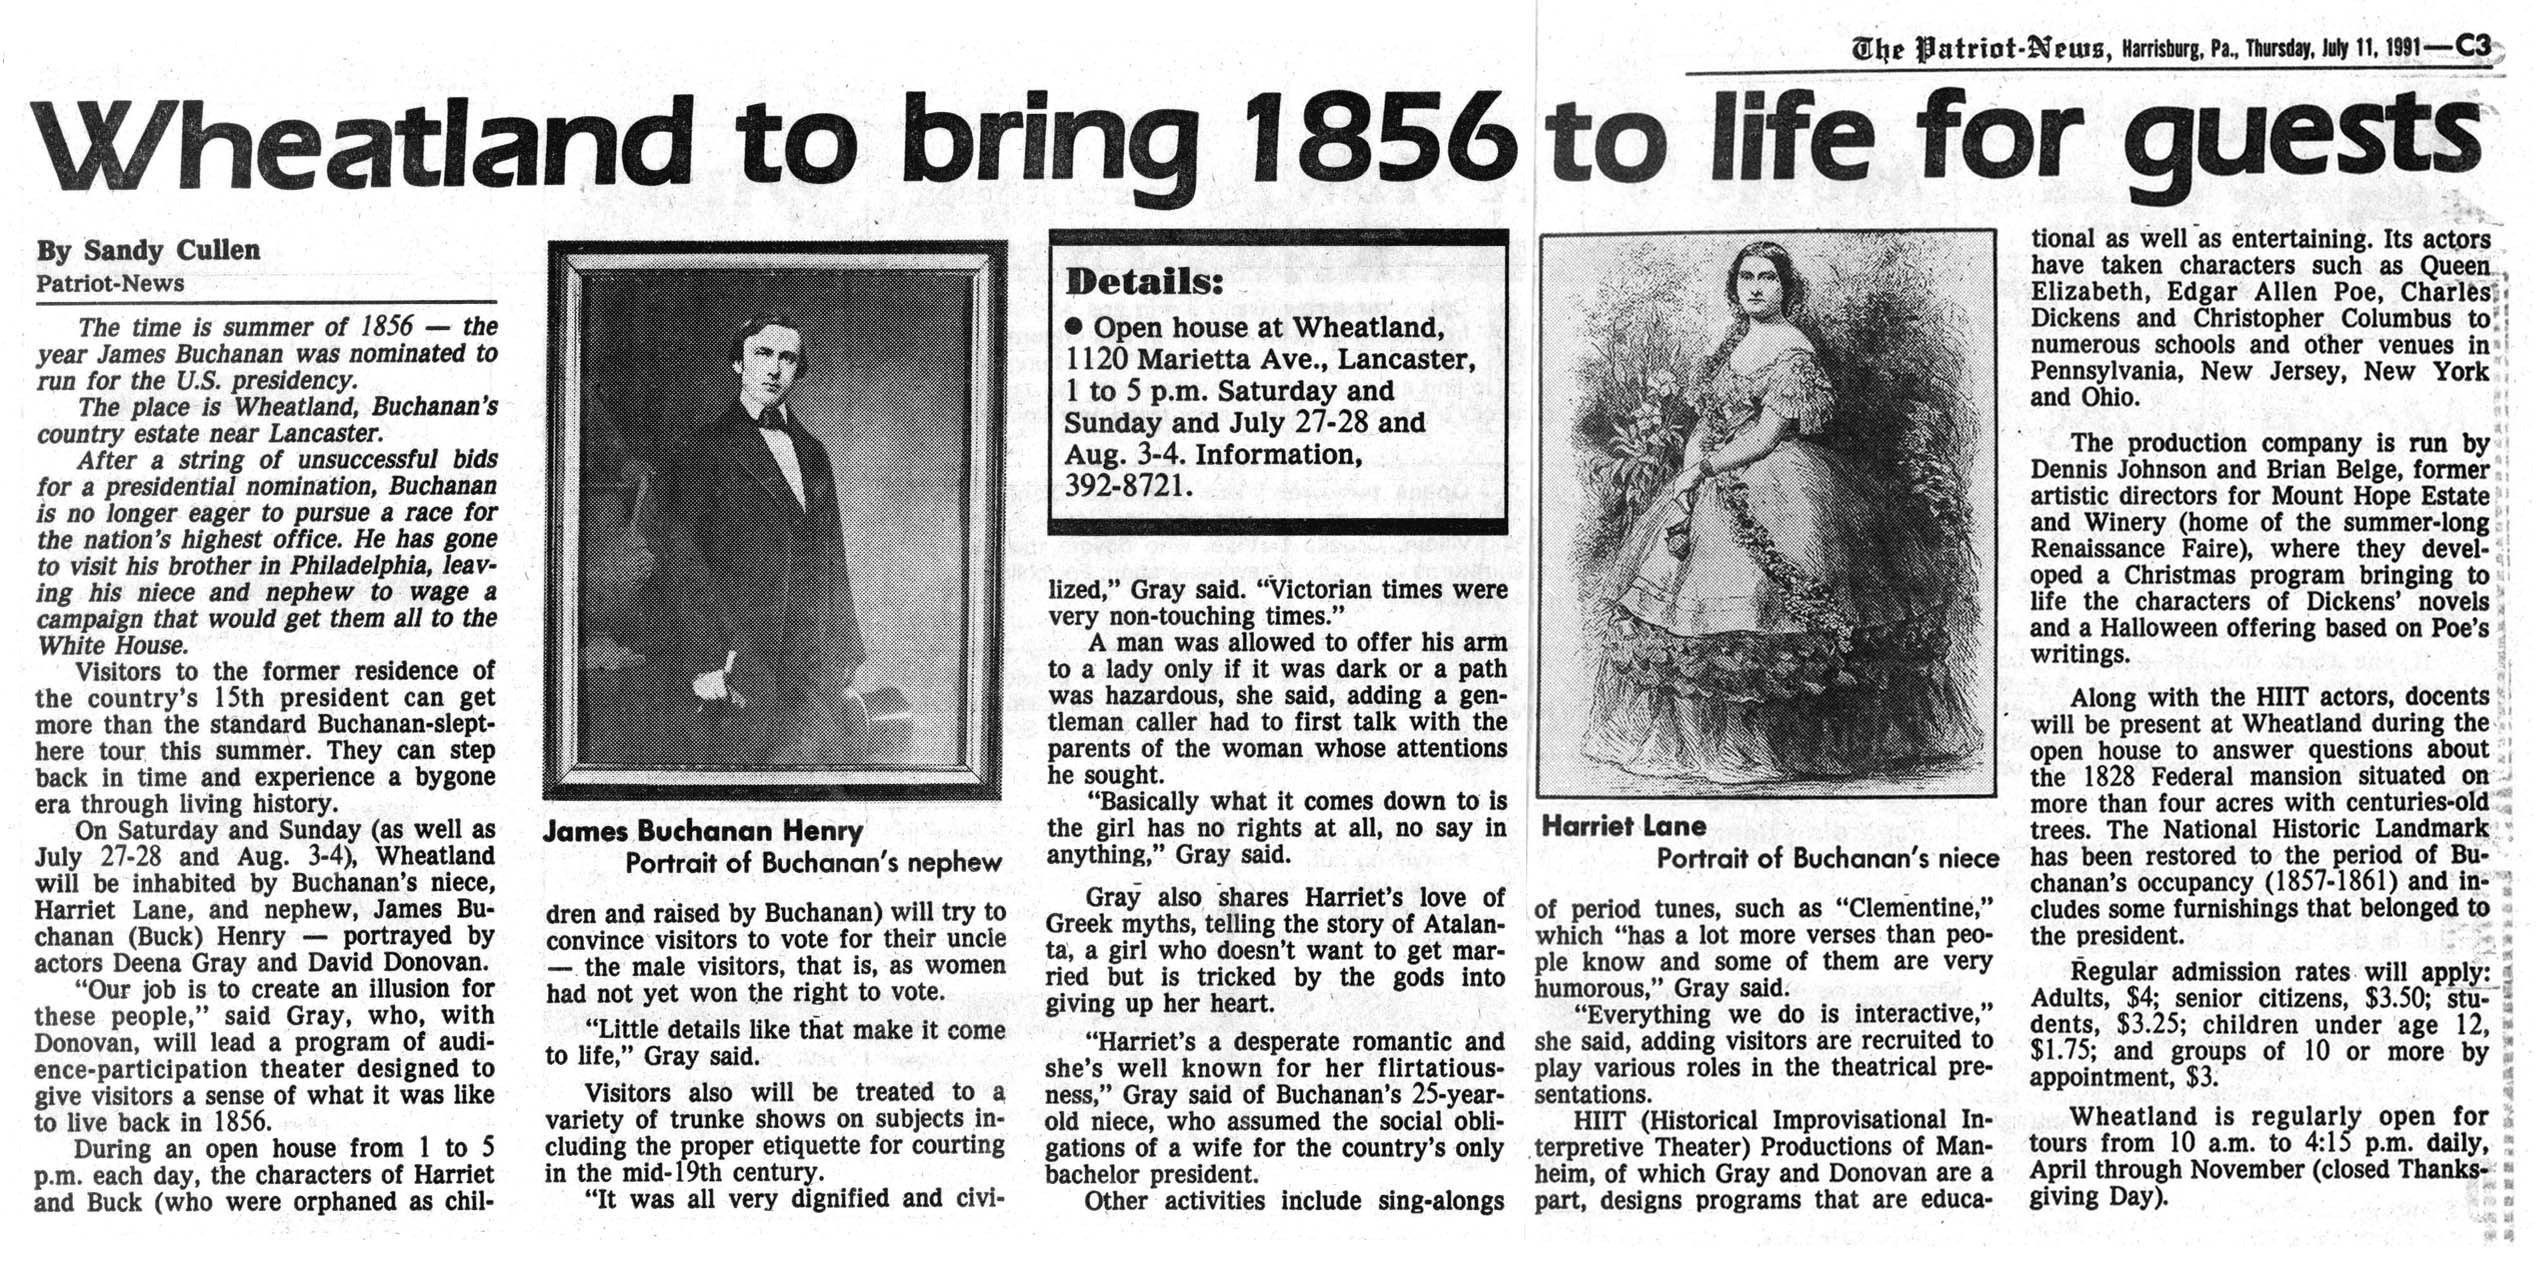 Wheatland-to-Bring-1856-article-1991-complete